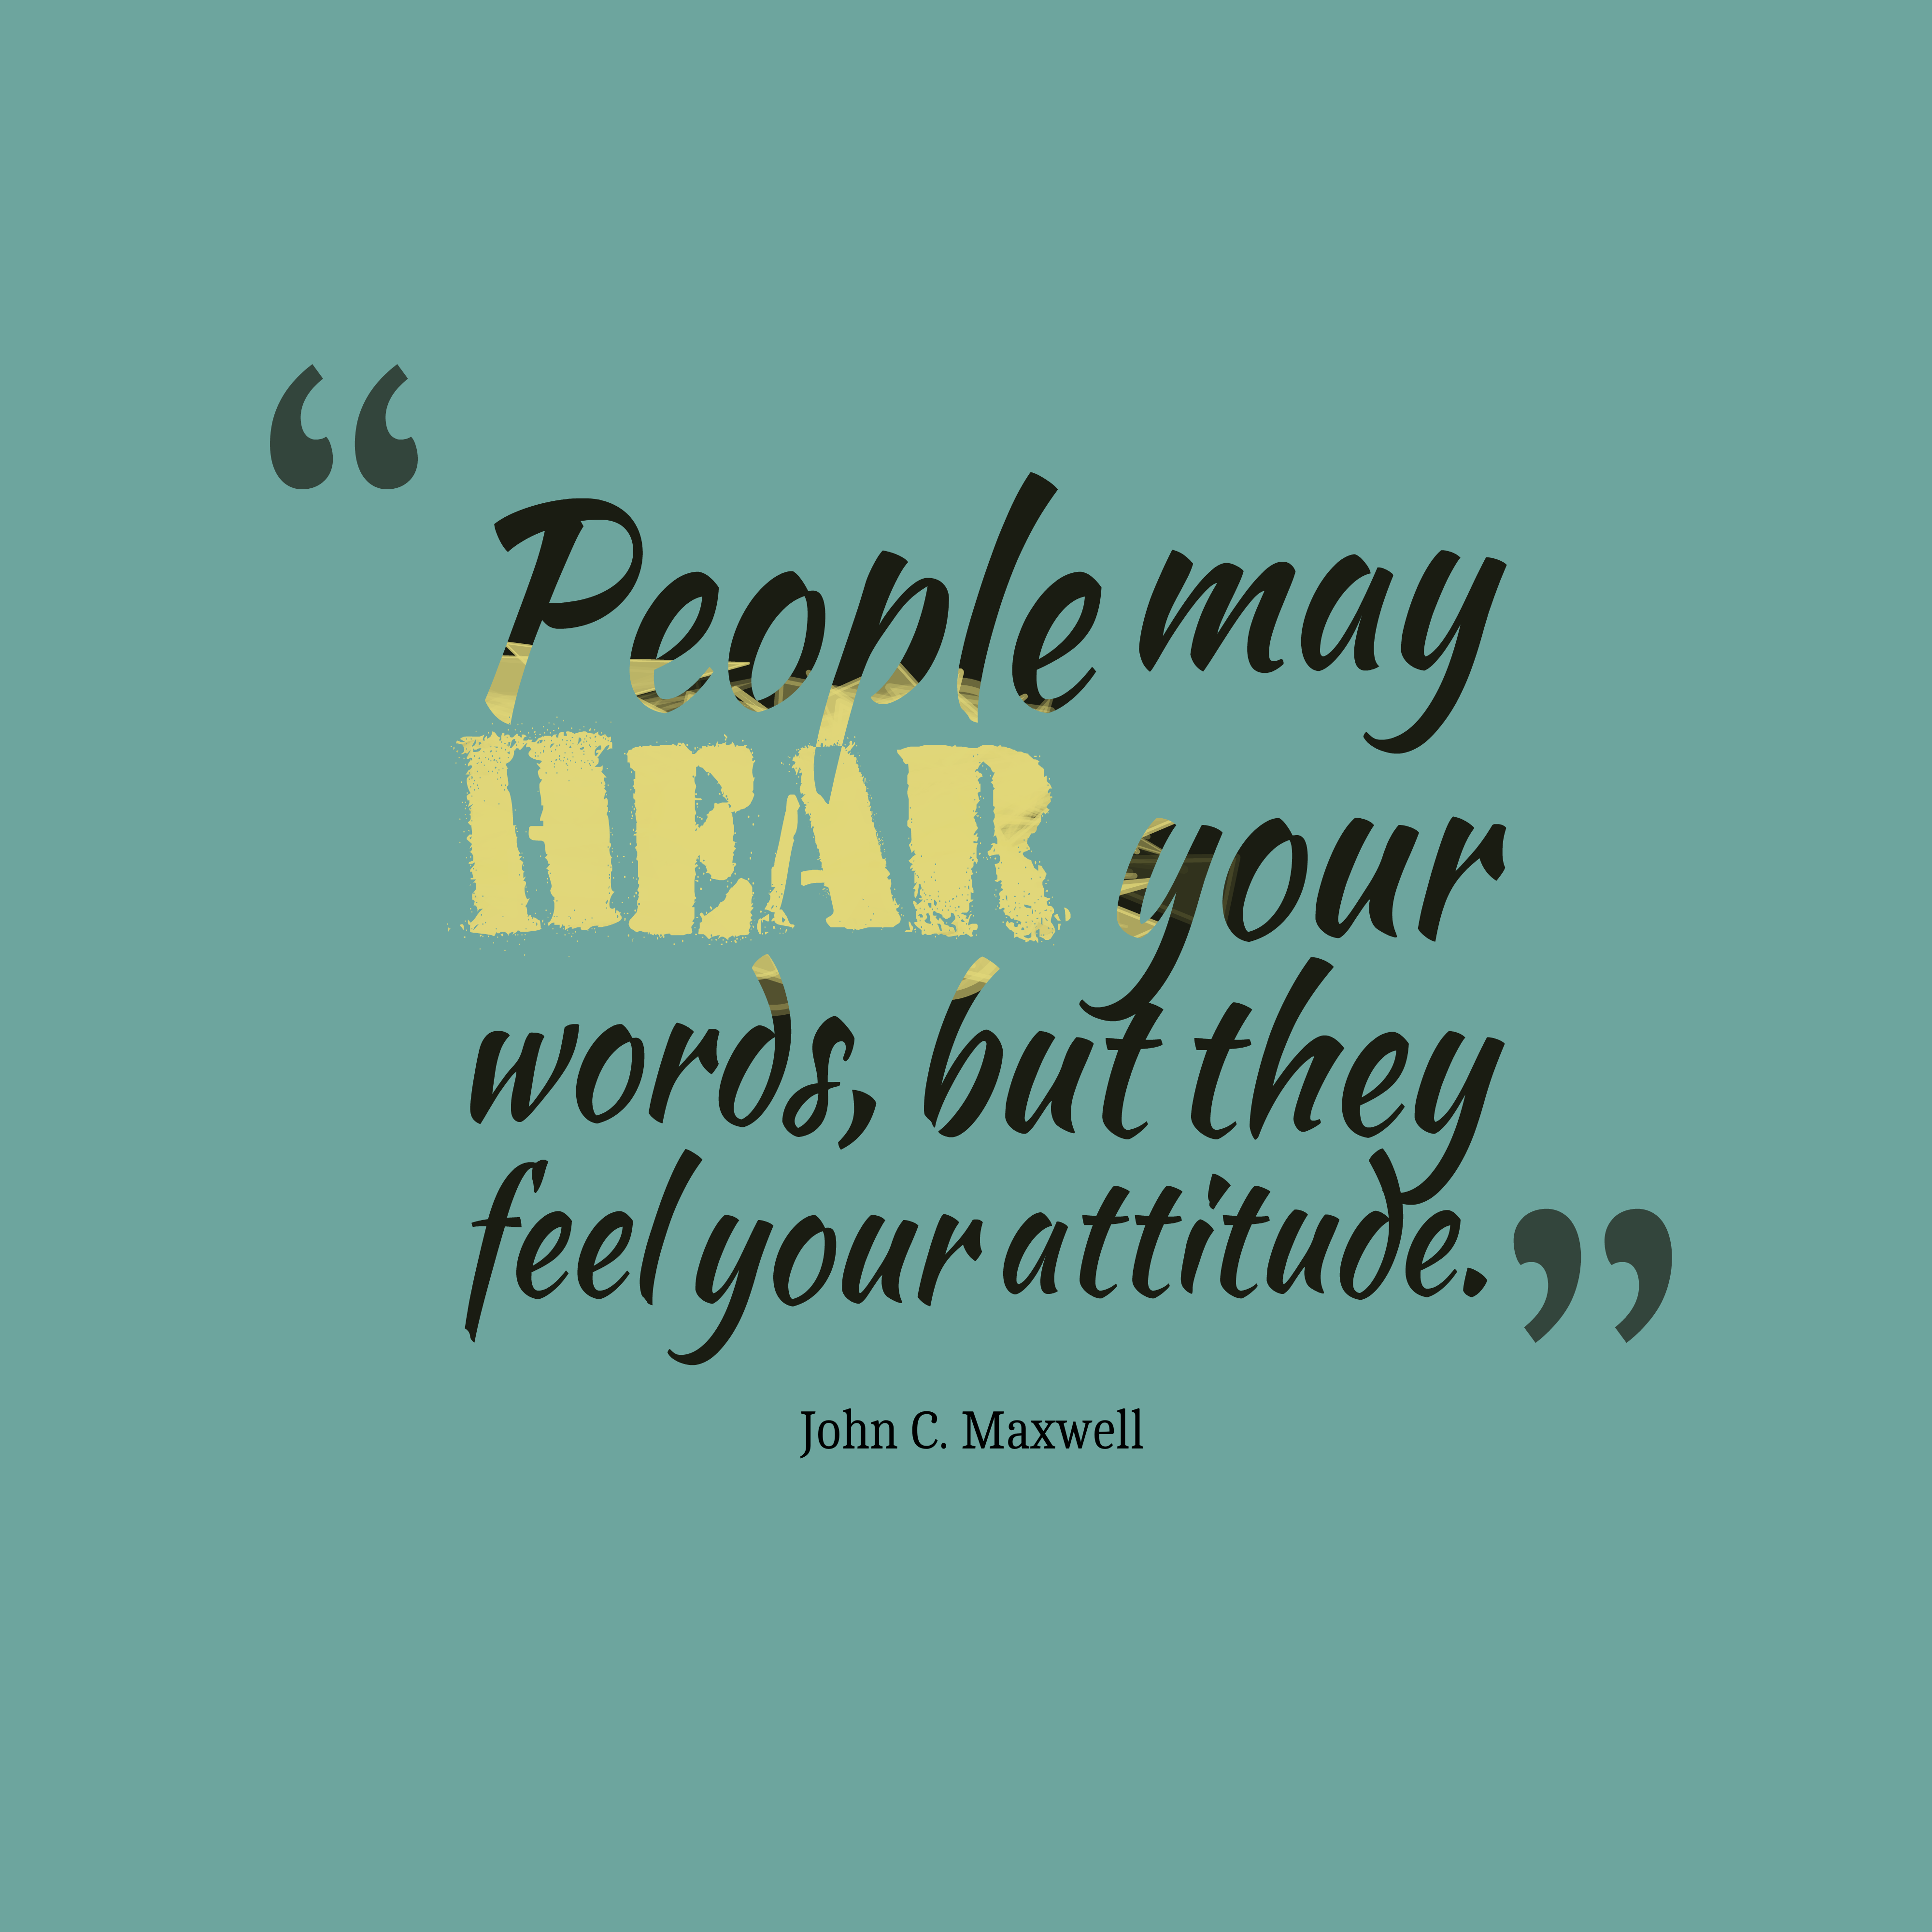 56.png hear inspirational maxwell maxwell john  c may john your c quotes by words__quotes people